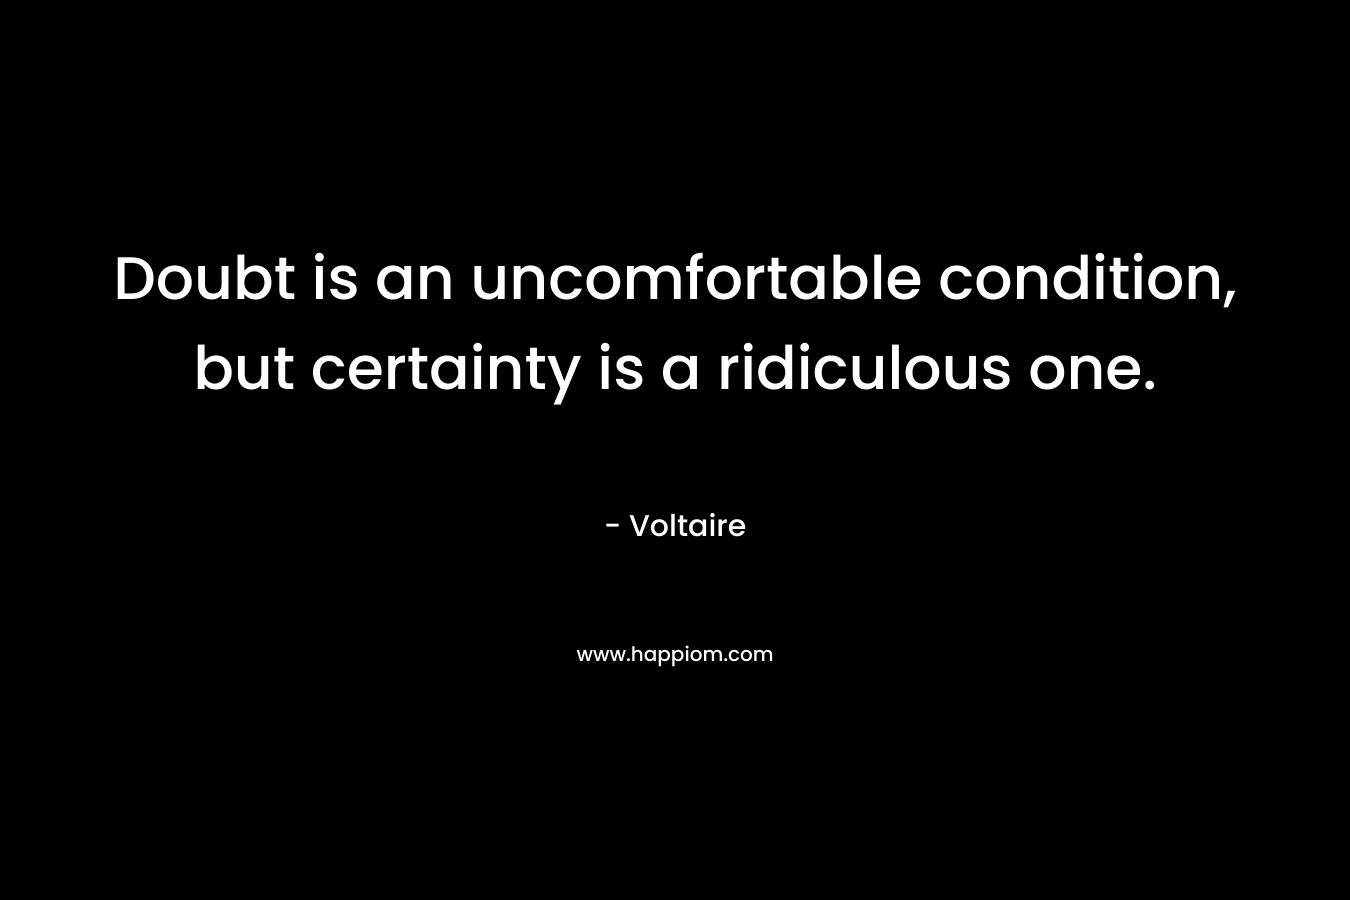 Doubt is an uncomfortable condition, but certainty is a ridiculous one.